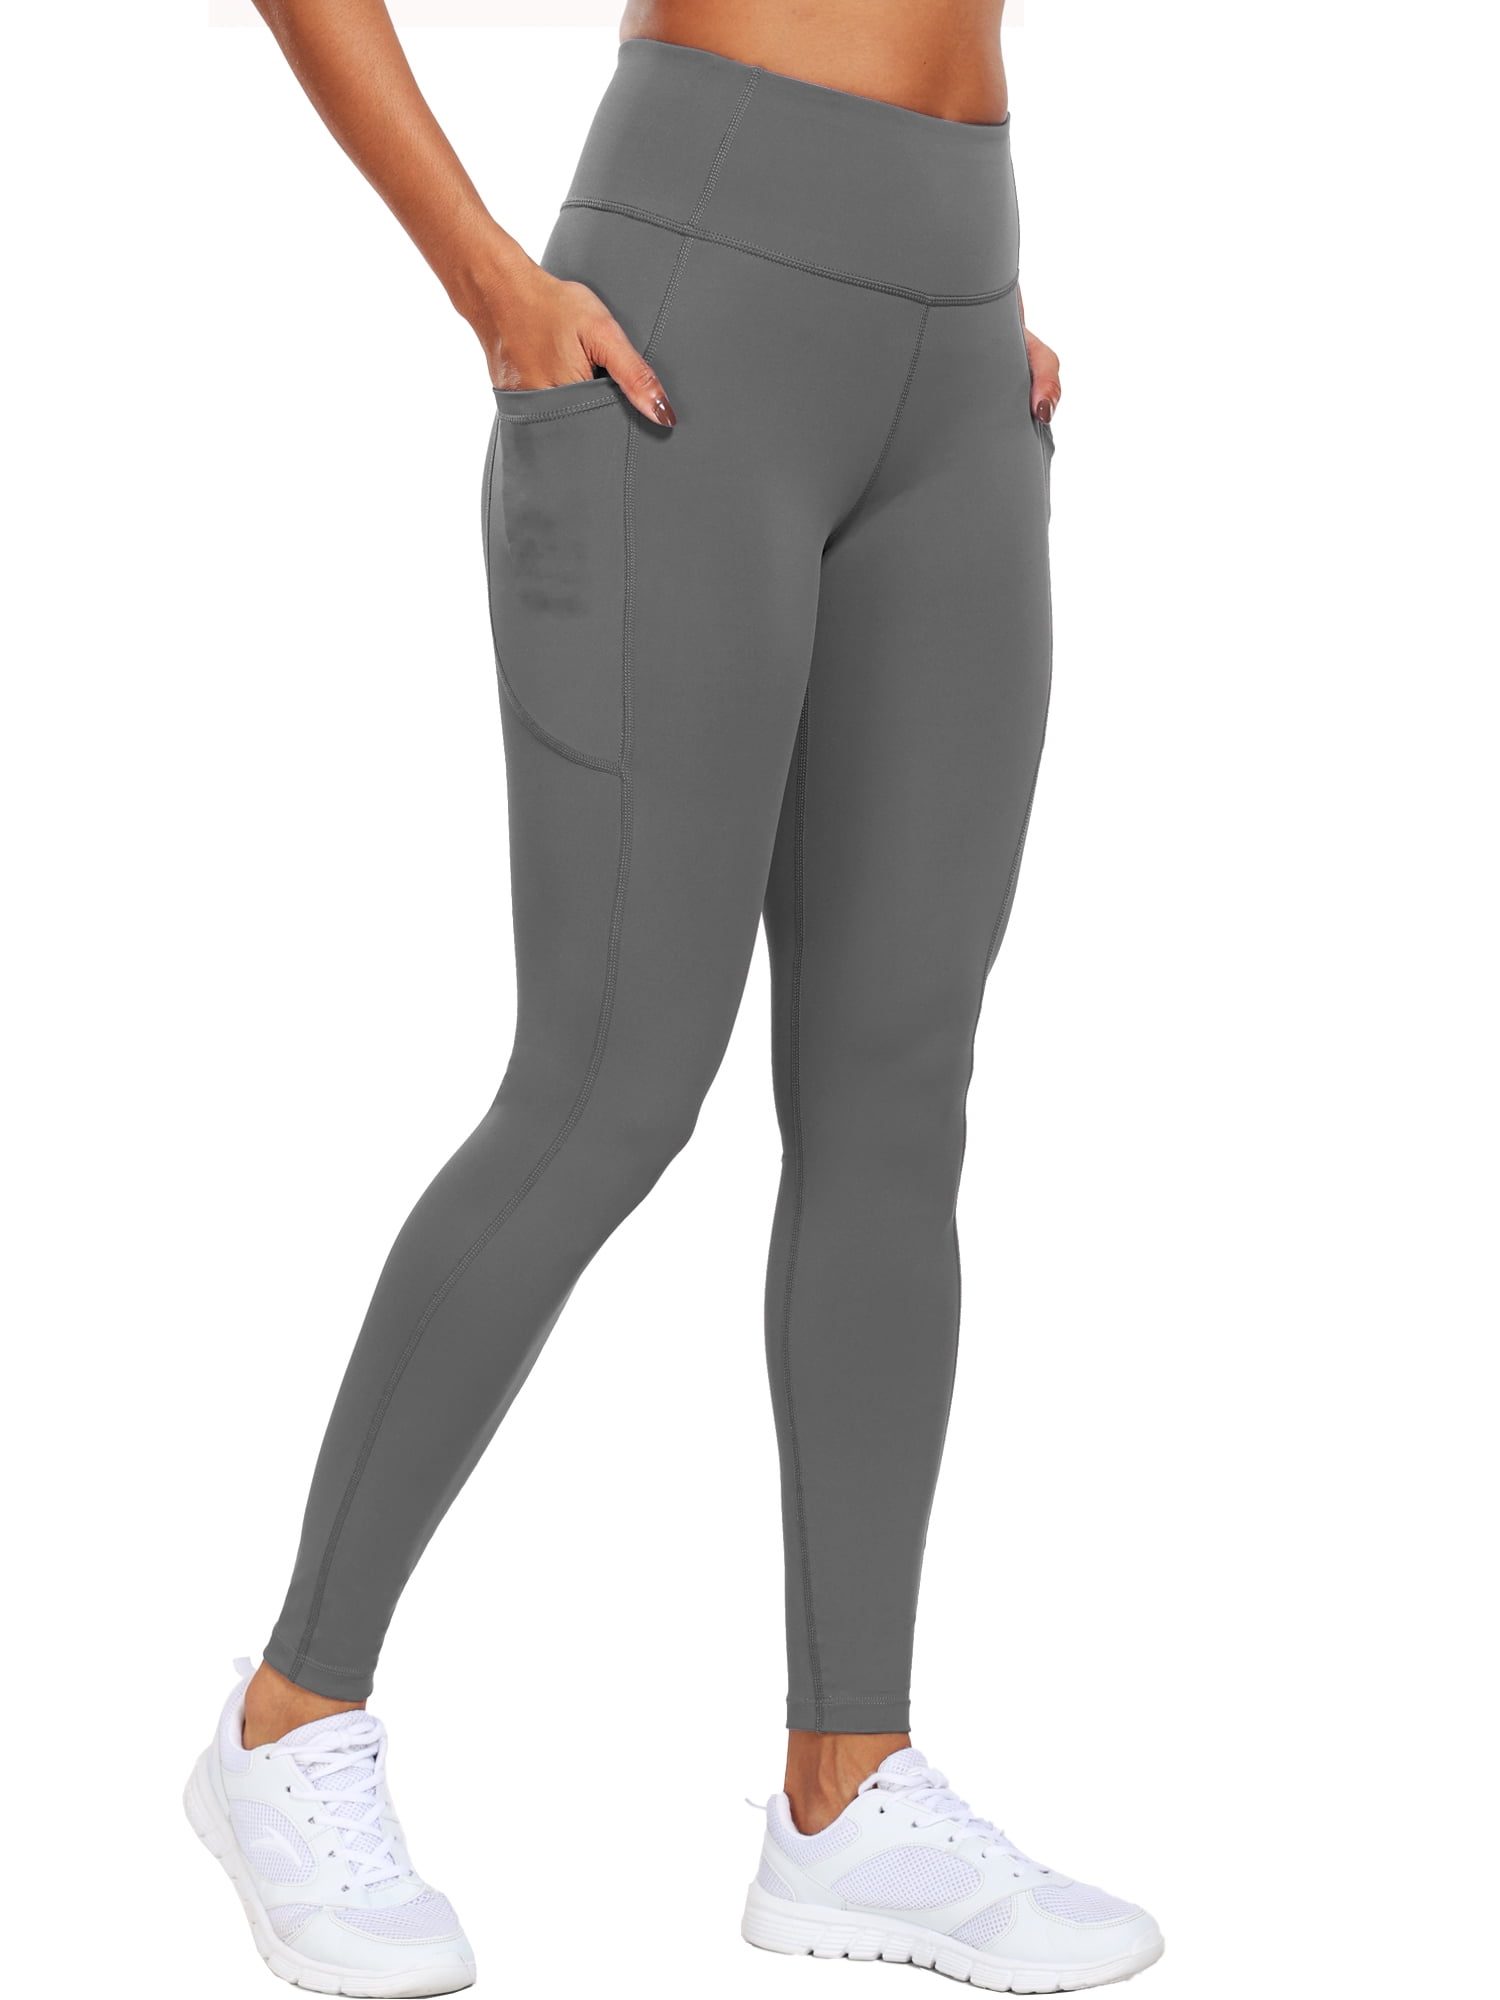 NELEUS Womens High Waist Ankle Yoga Leggings Workout with Two  Pockets,Gray,US Size S